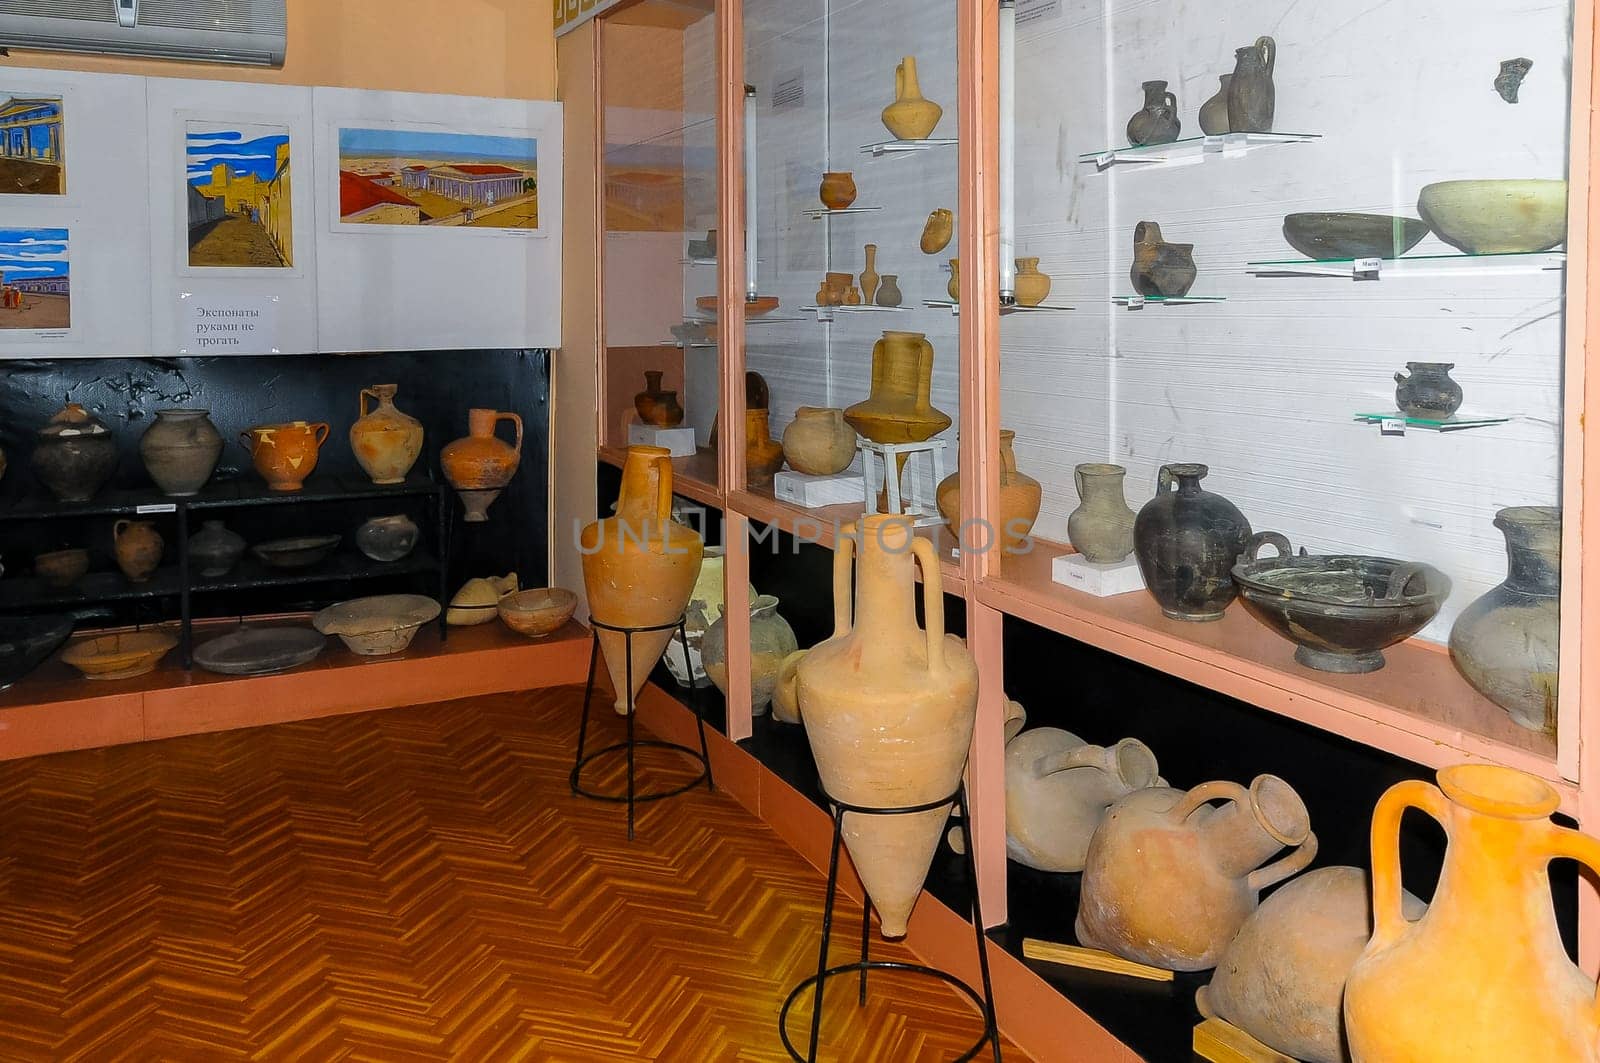 UKRAINE, Pontic Olbia - SEPTEMBER 24, 2010: exhibits from excavations inside the museum at the archaeological site of the ancient Greek city of Olbia, Ukraine